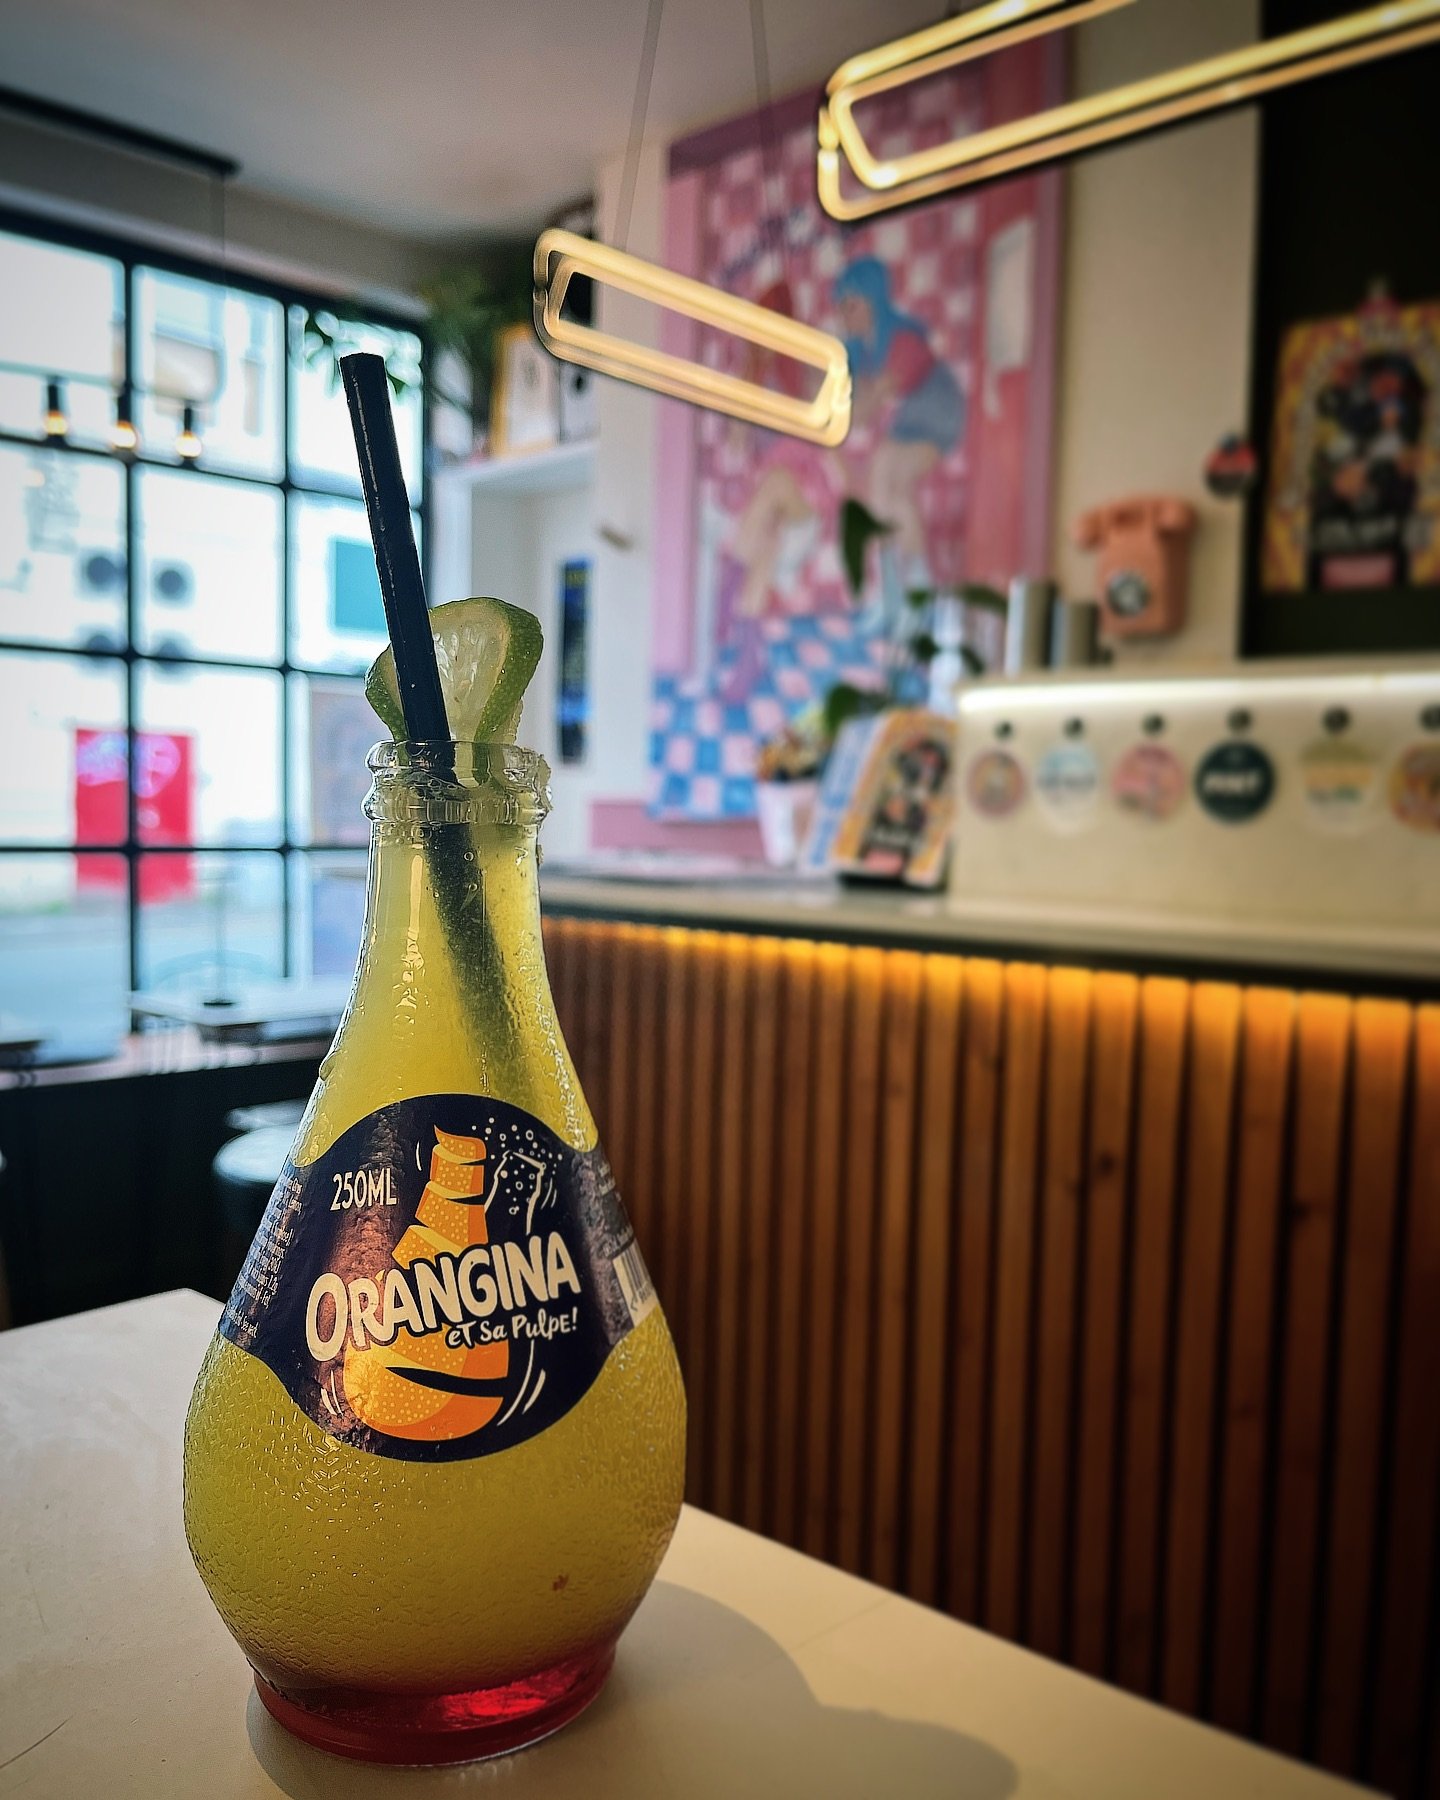 Introducing the &ldquo;Orangina-Rhonarita&rdquo;&hellip;named after one of our absolute fave regulars @rhoborthwick who&rsquo;s obsessive enthusiasm for Orangina is unrivalled&hellip;If you&rsquo;re lucky enough to get served by her at @bakerandgraze